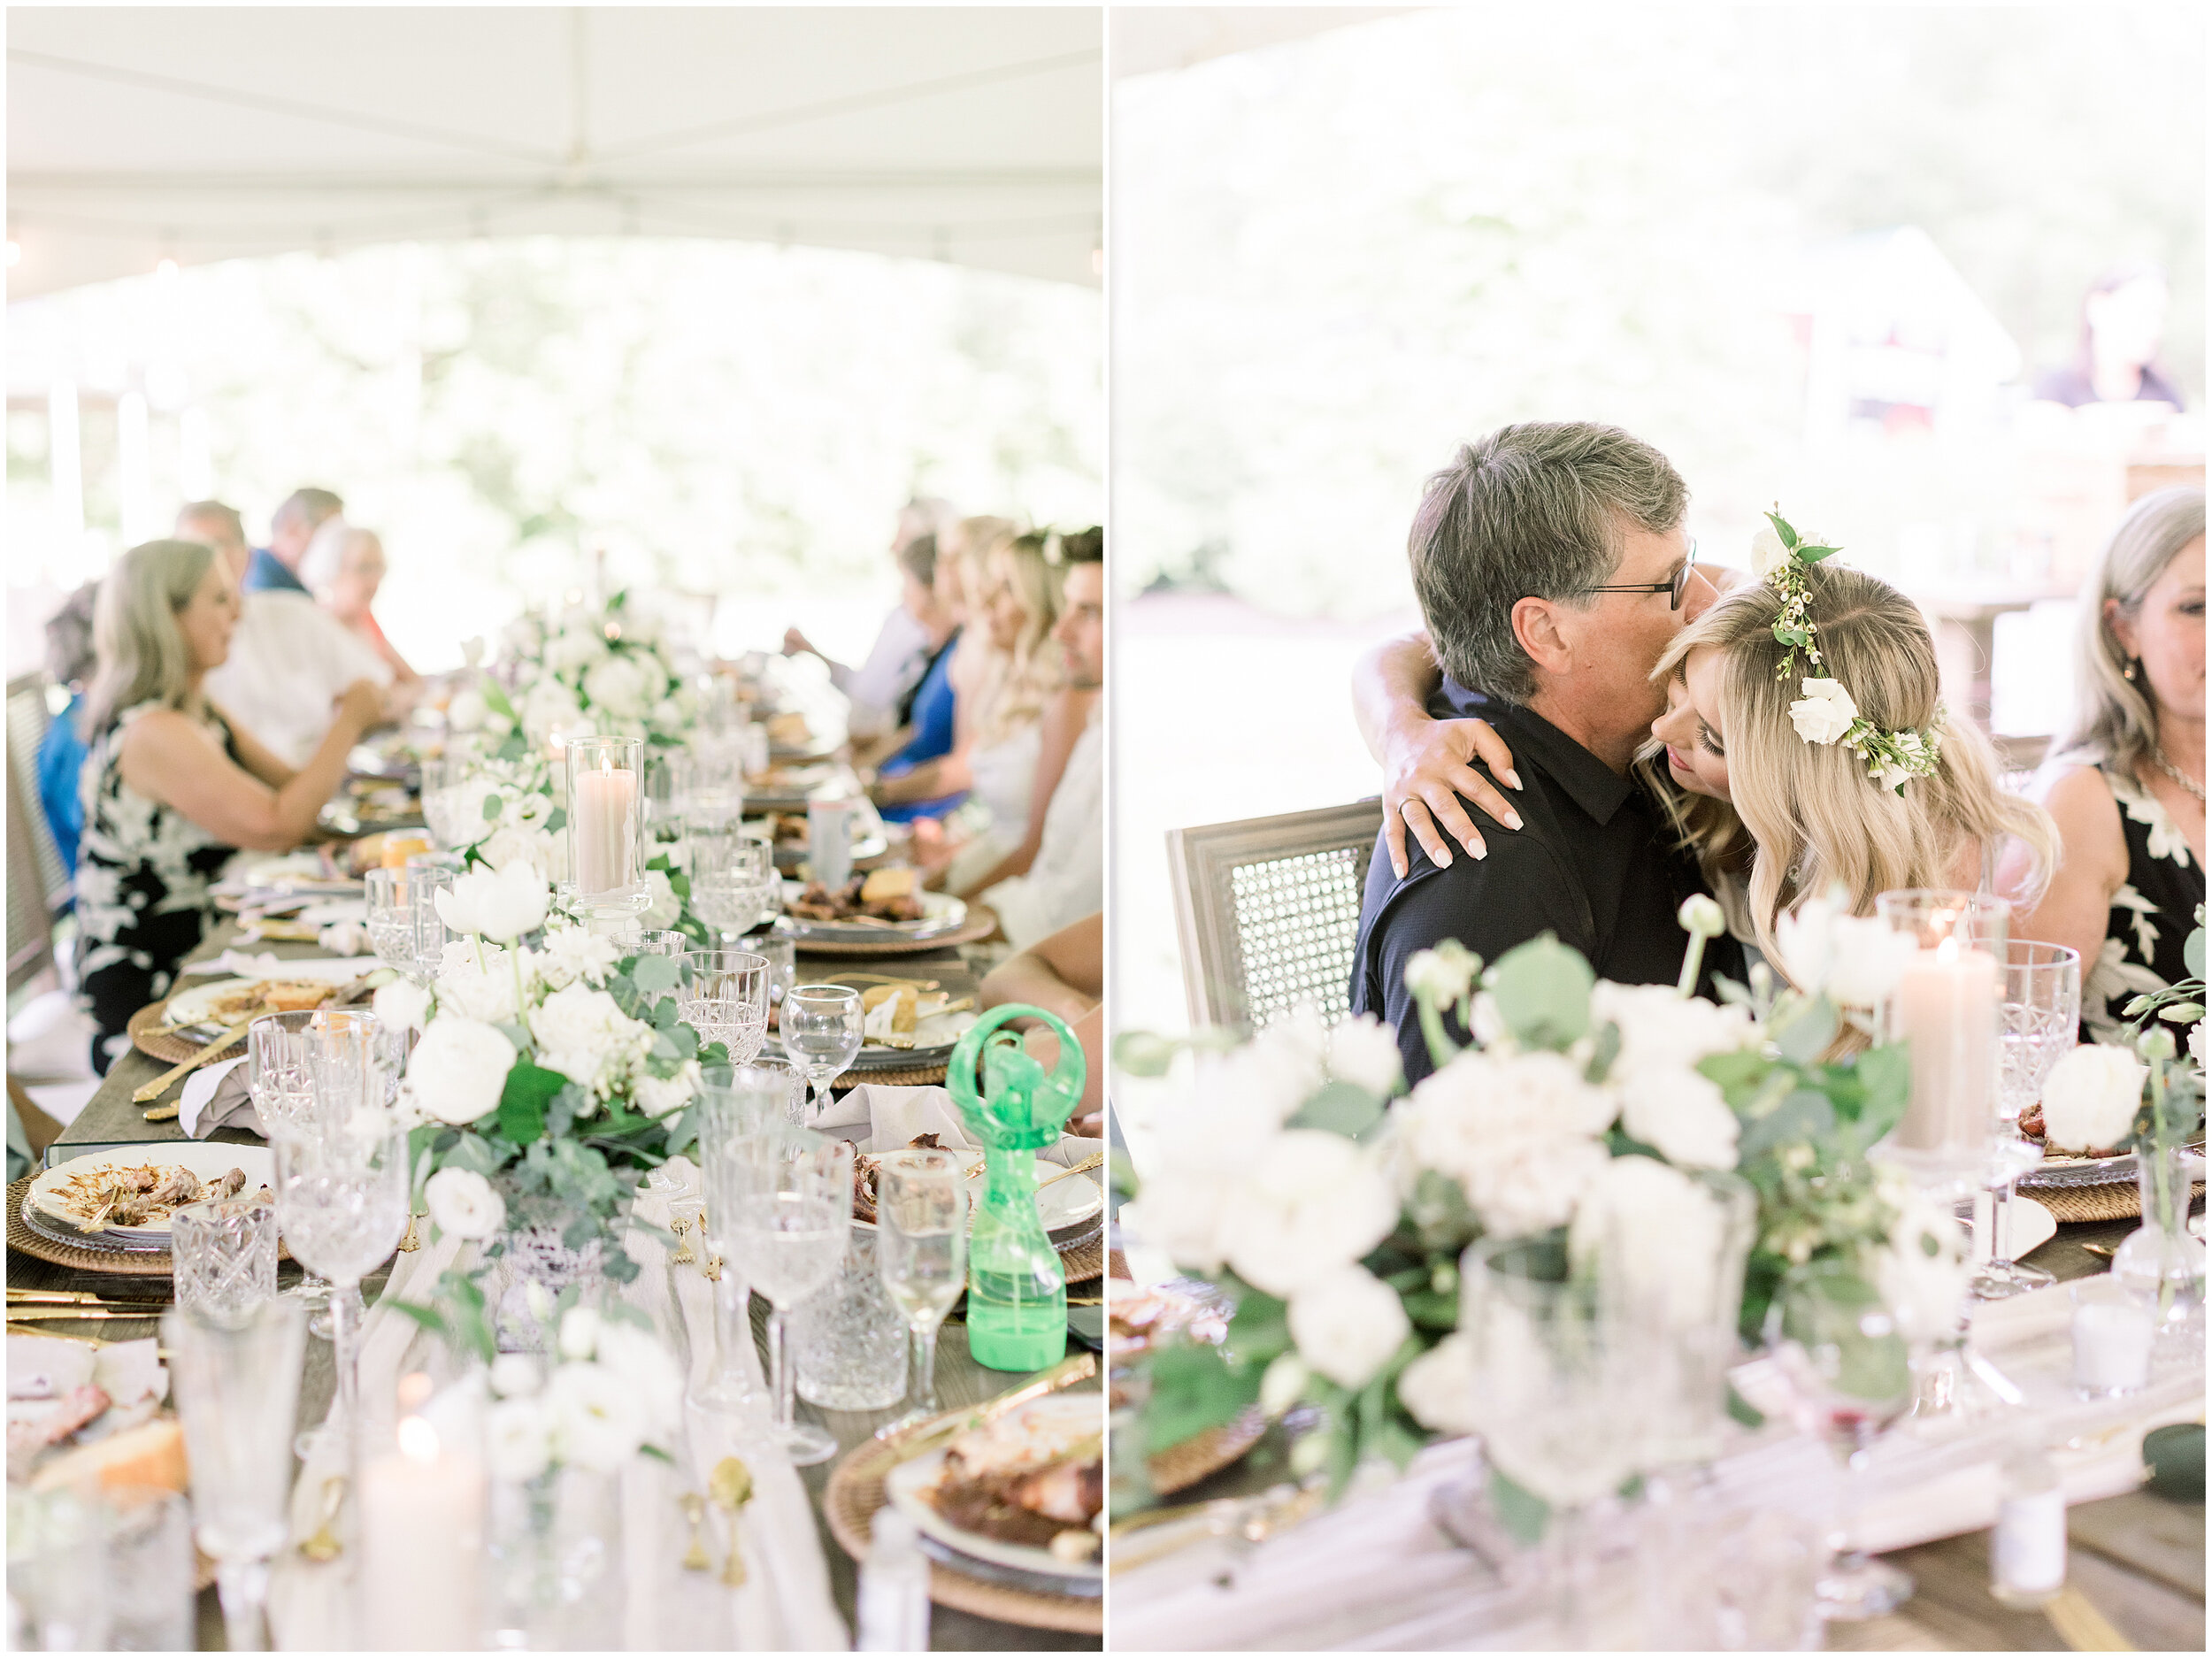  Outdoor backyard wedding with white tent and table decor during wedding dinner with white flowers by Chelsea Mason Photography in Ottawa, ON. how to decorate a table for wedding outdoor wedding table decor wedding dinner table decor white flower wed